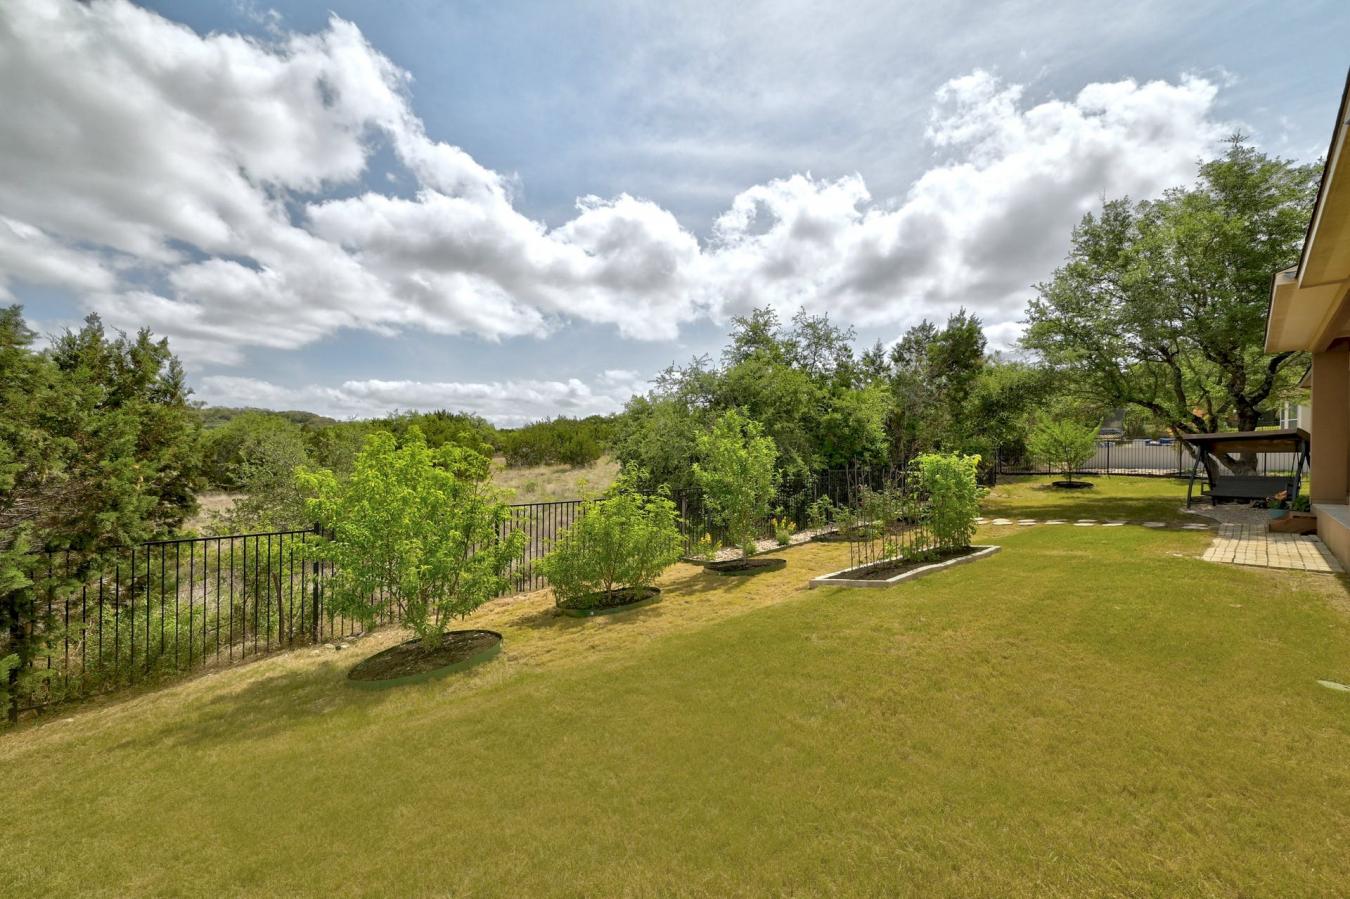 17101 Rush Pea Circle, Austin, Texas, 78738, United States, 5 Bedrooms Bedrooms, ,4 BathroomsBathrooms,Residential,For Sale,17101 Rush Pea Circle,1477905